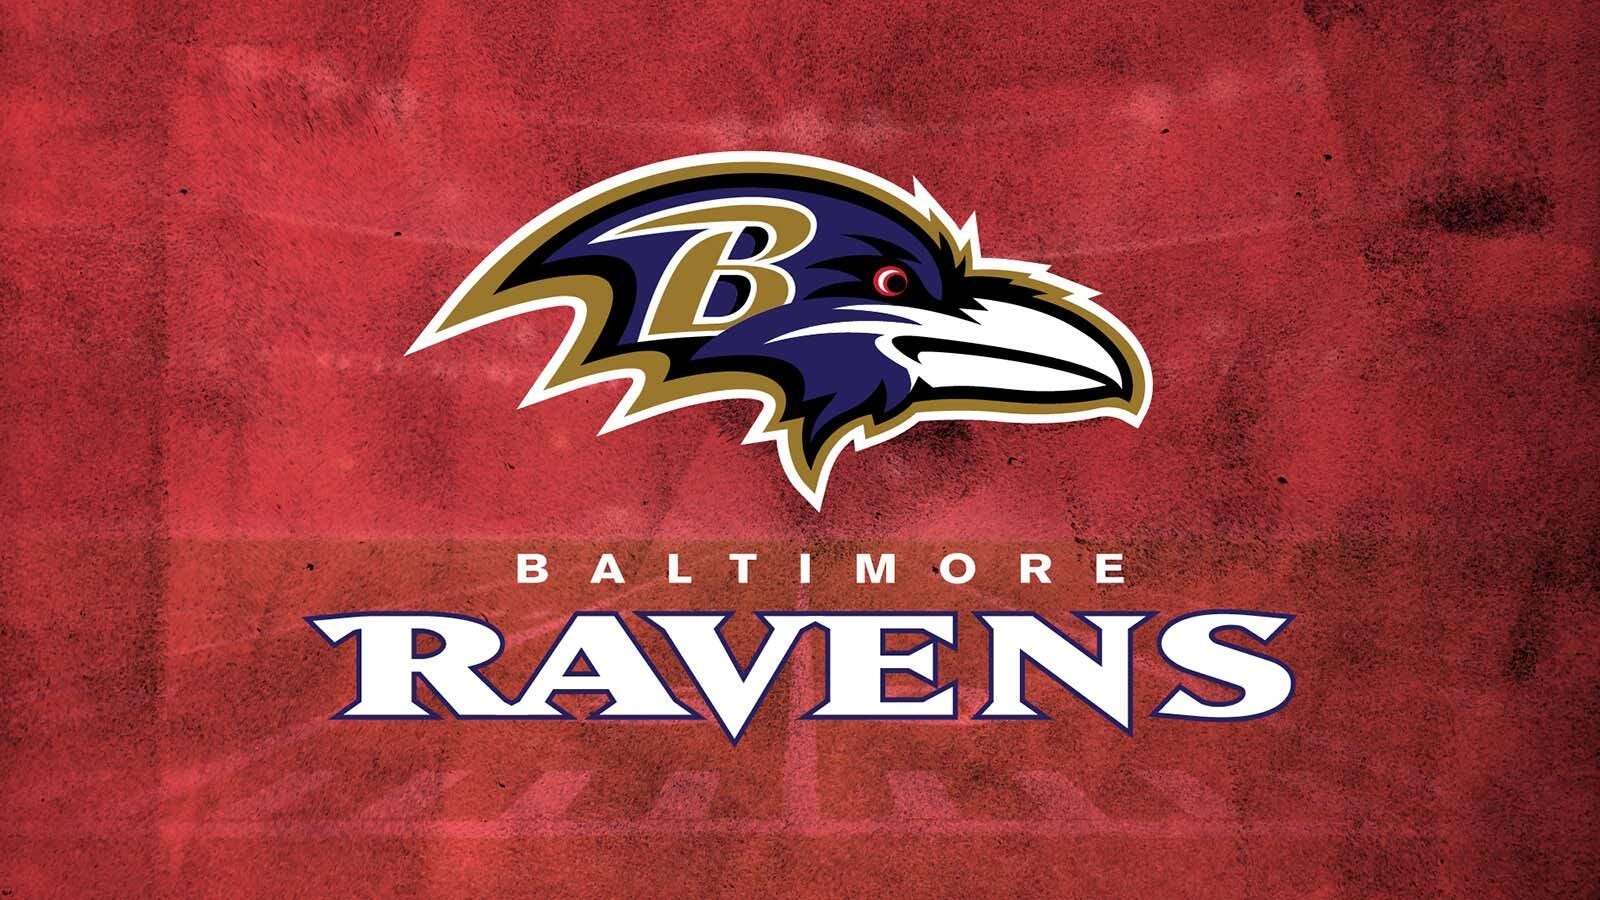 what channel does the baltimore ravens game come on